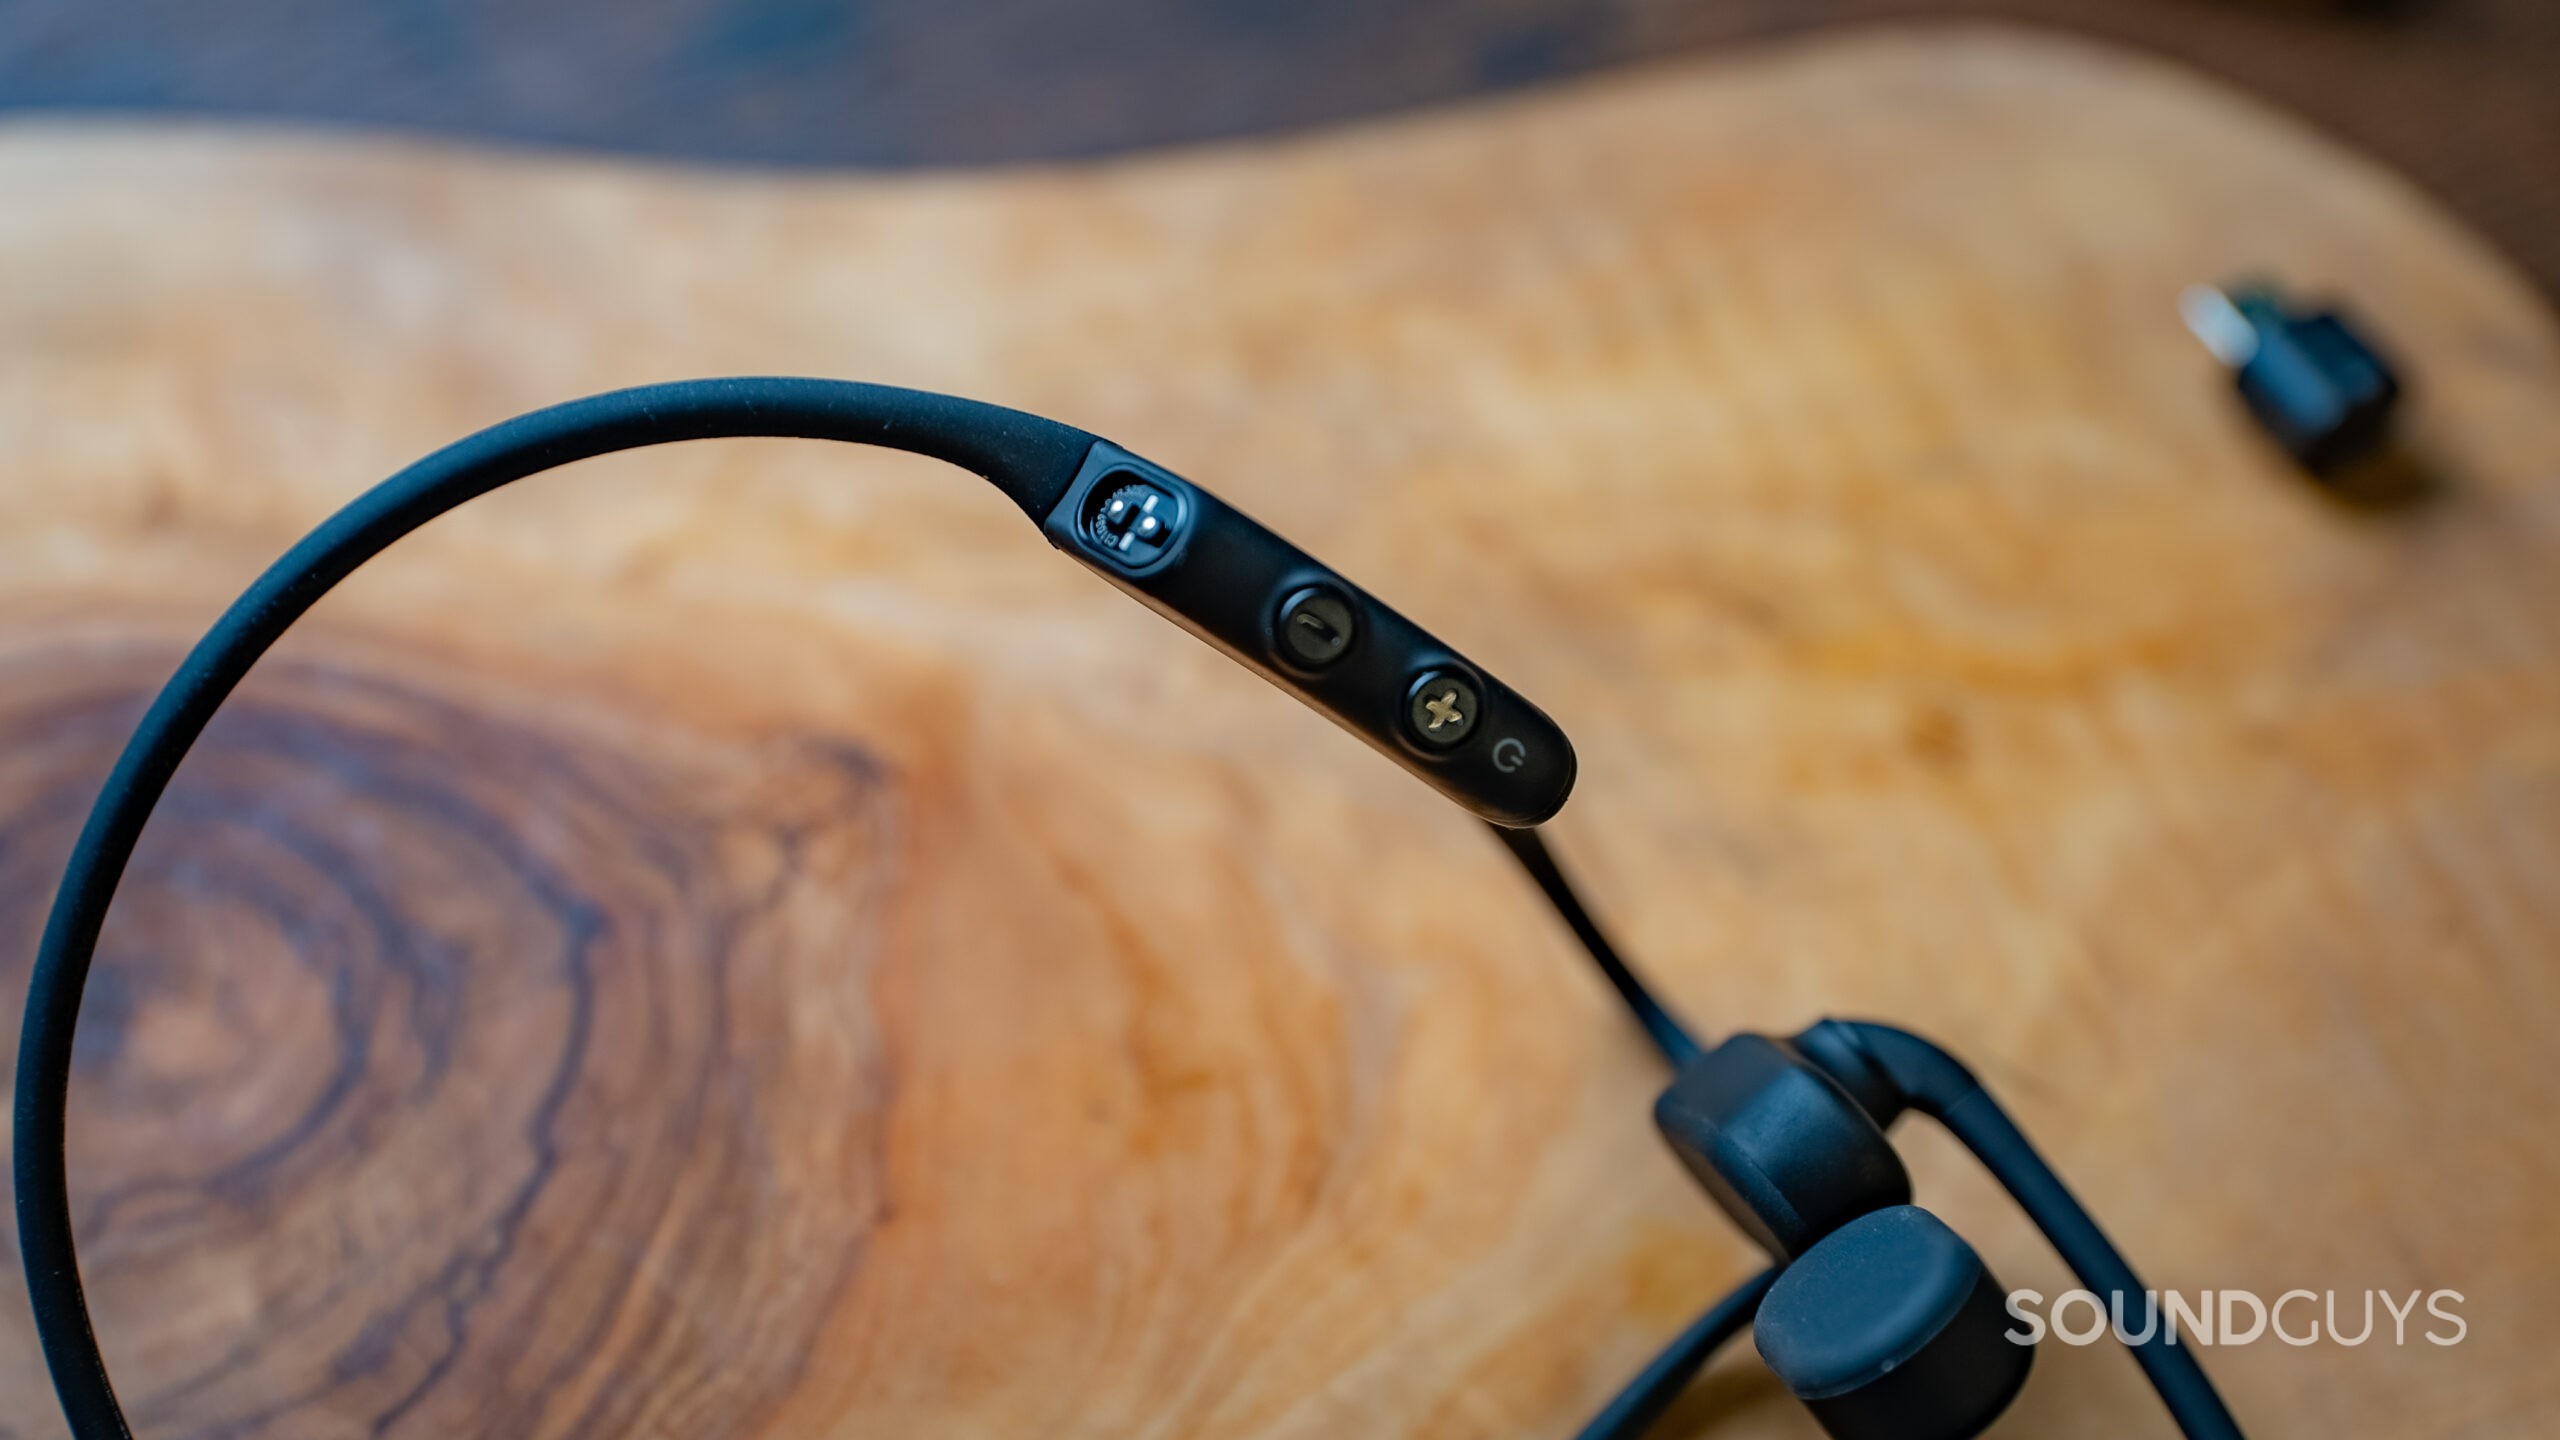 A close up of the volume buttons and proprietary charging port is shown on the Shokz OpenComm2 UC.